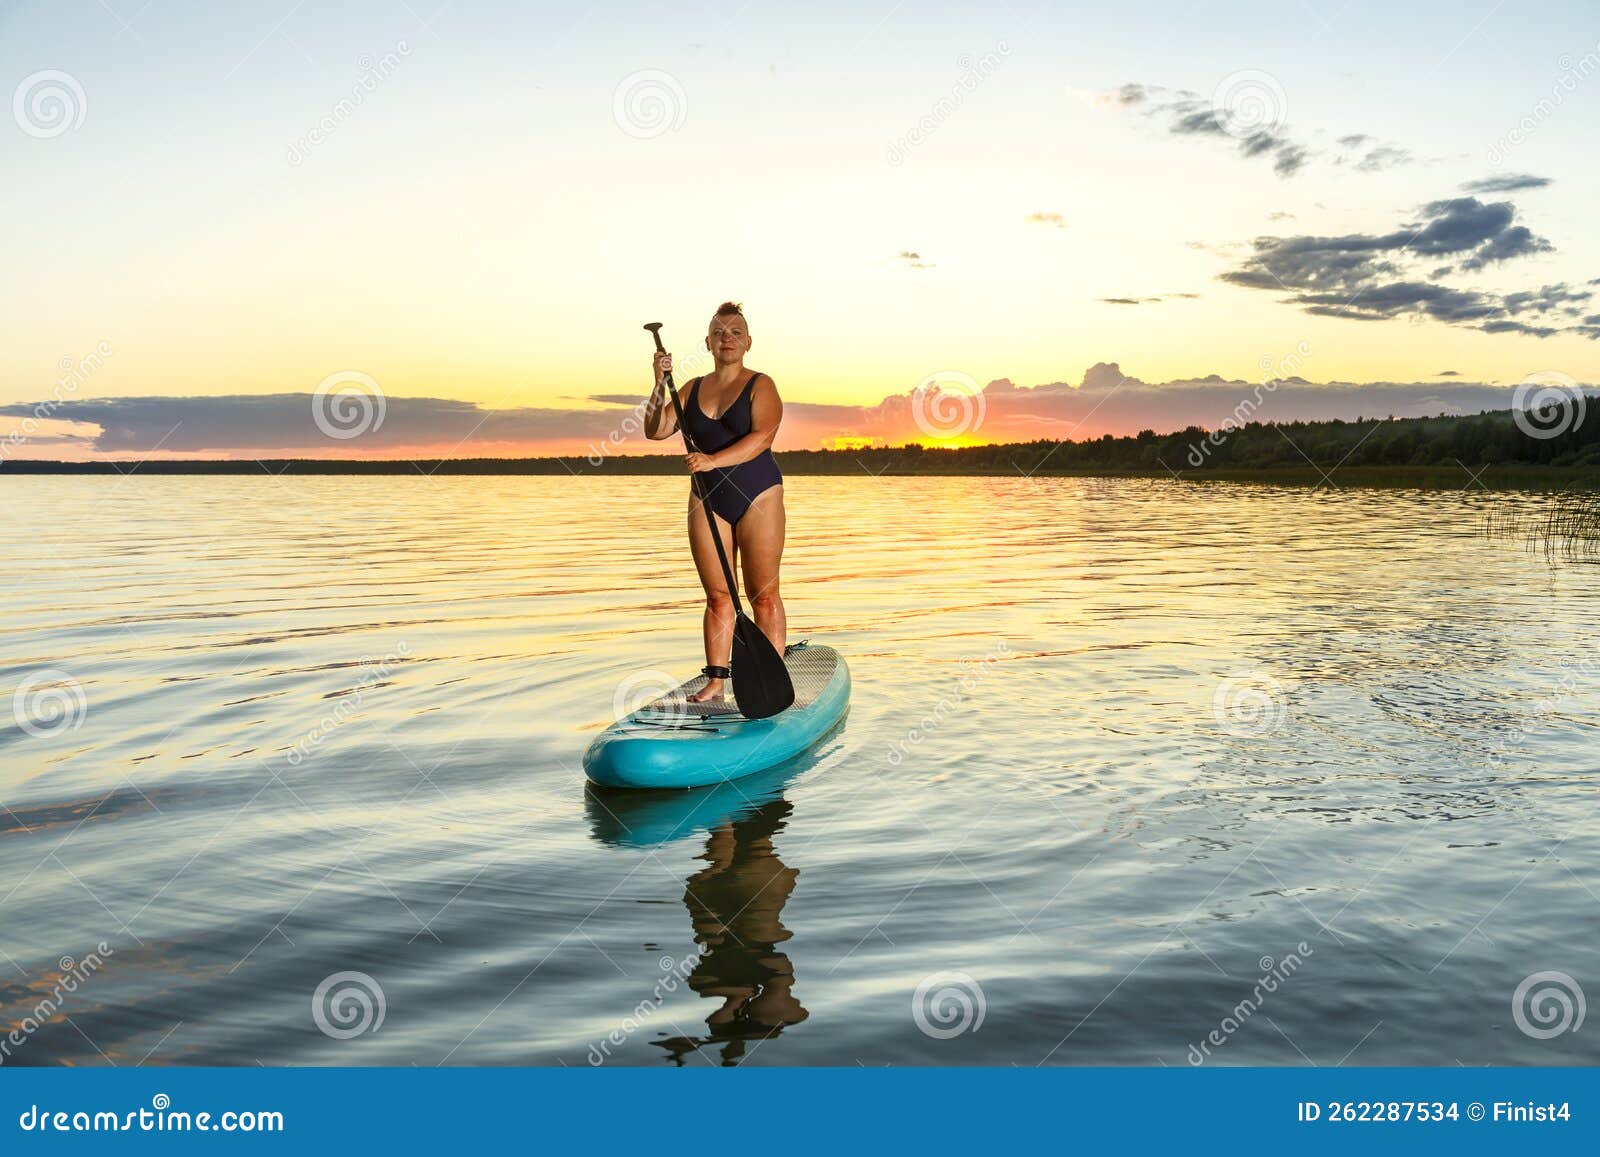 A Woman in a Shaved Swimsuit with a Mohawk on a Sup Board at Sunset in ...